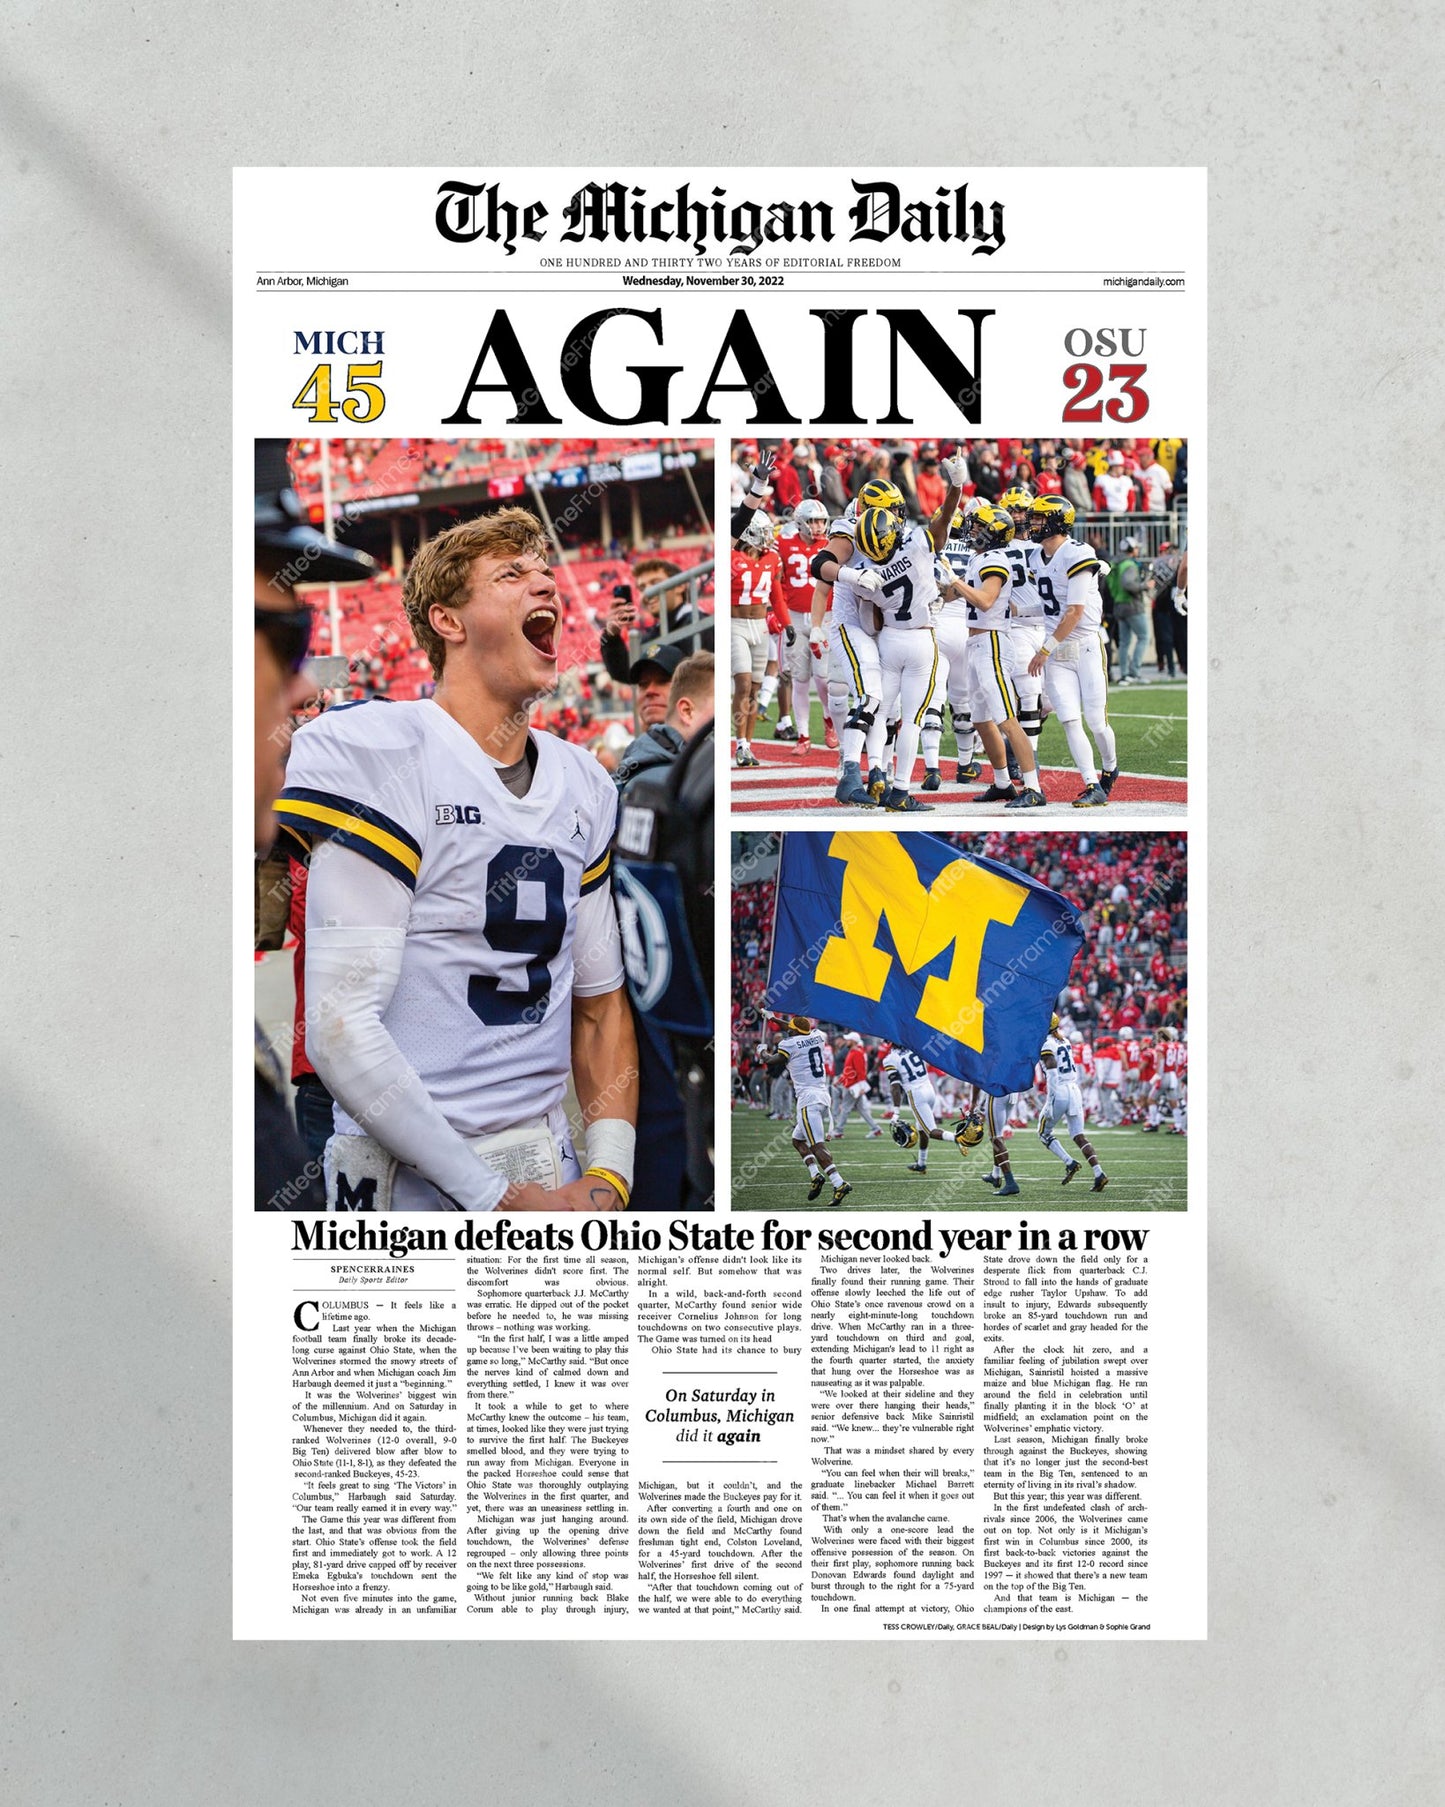 2022 Michigan Wolverines Defeat Ohio State: 'AGAIN' - Framed Newspaper Print - Title Game Frames